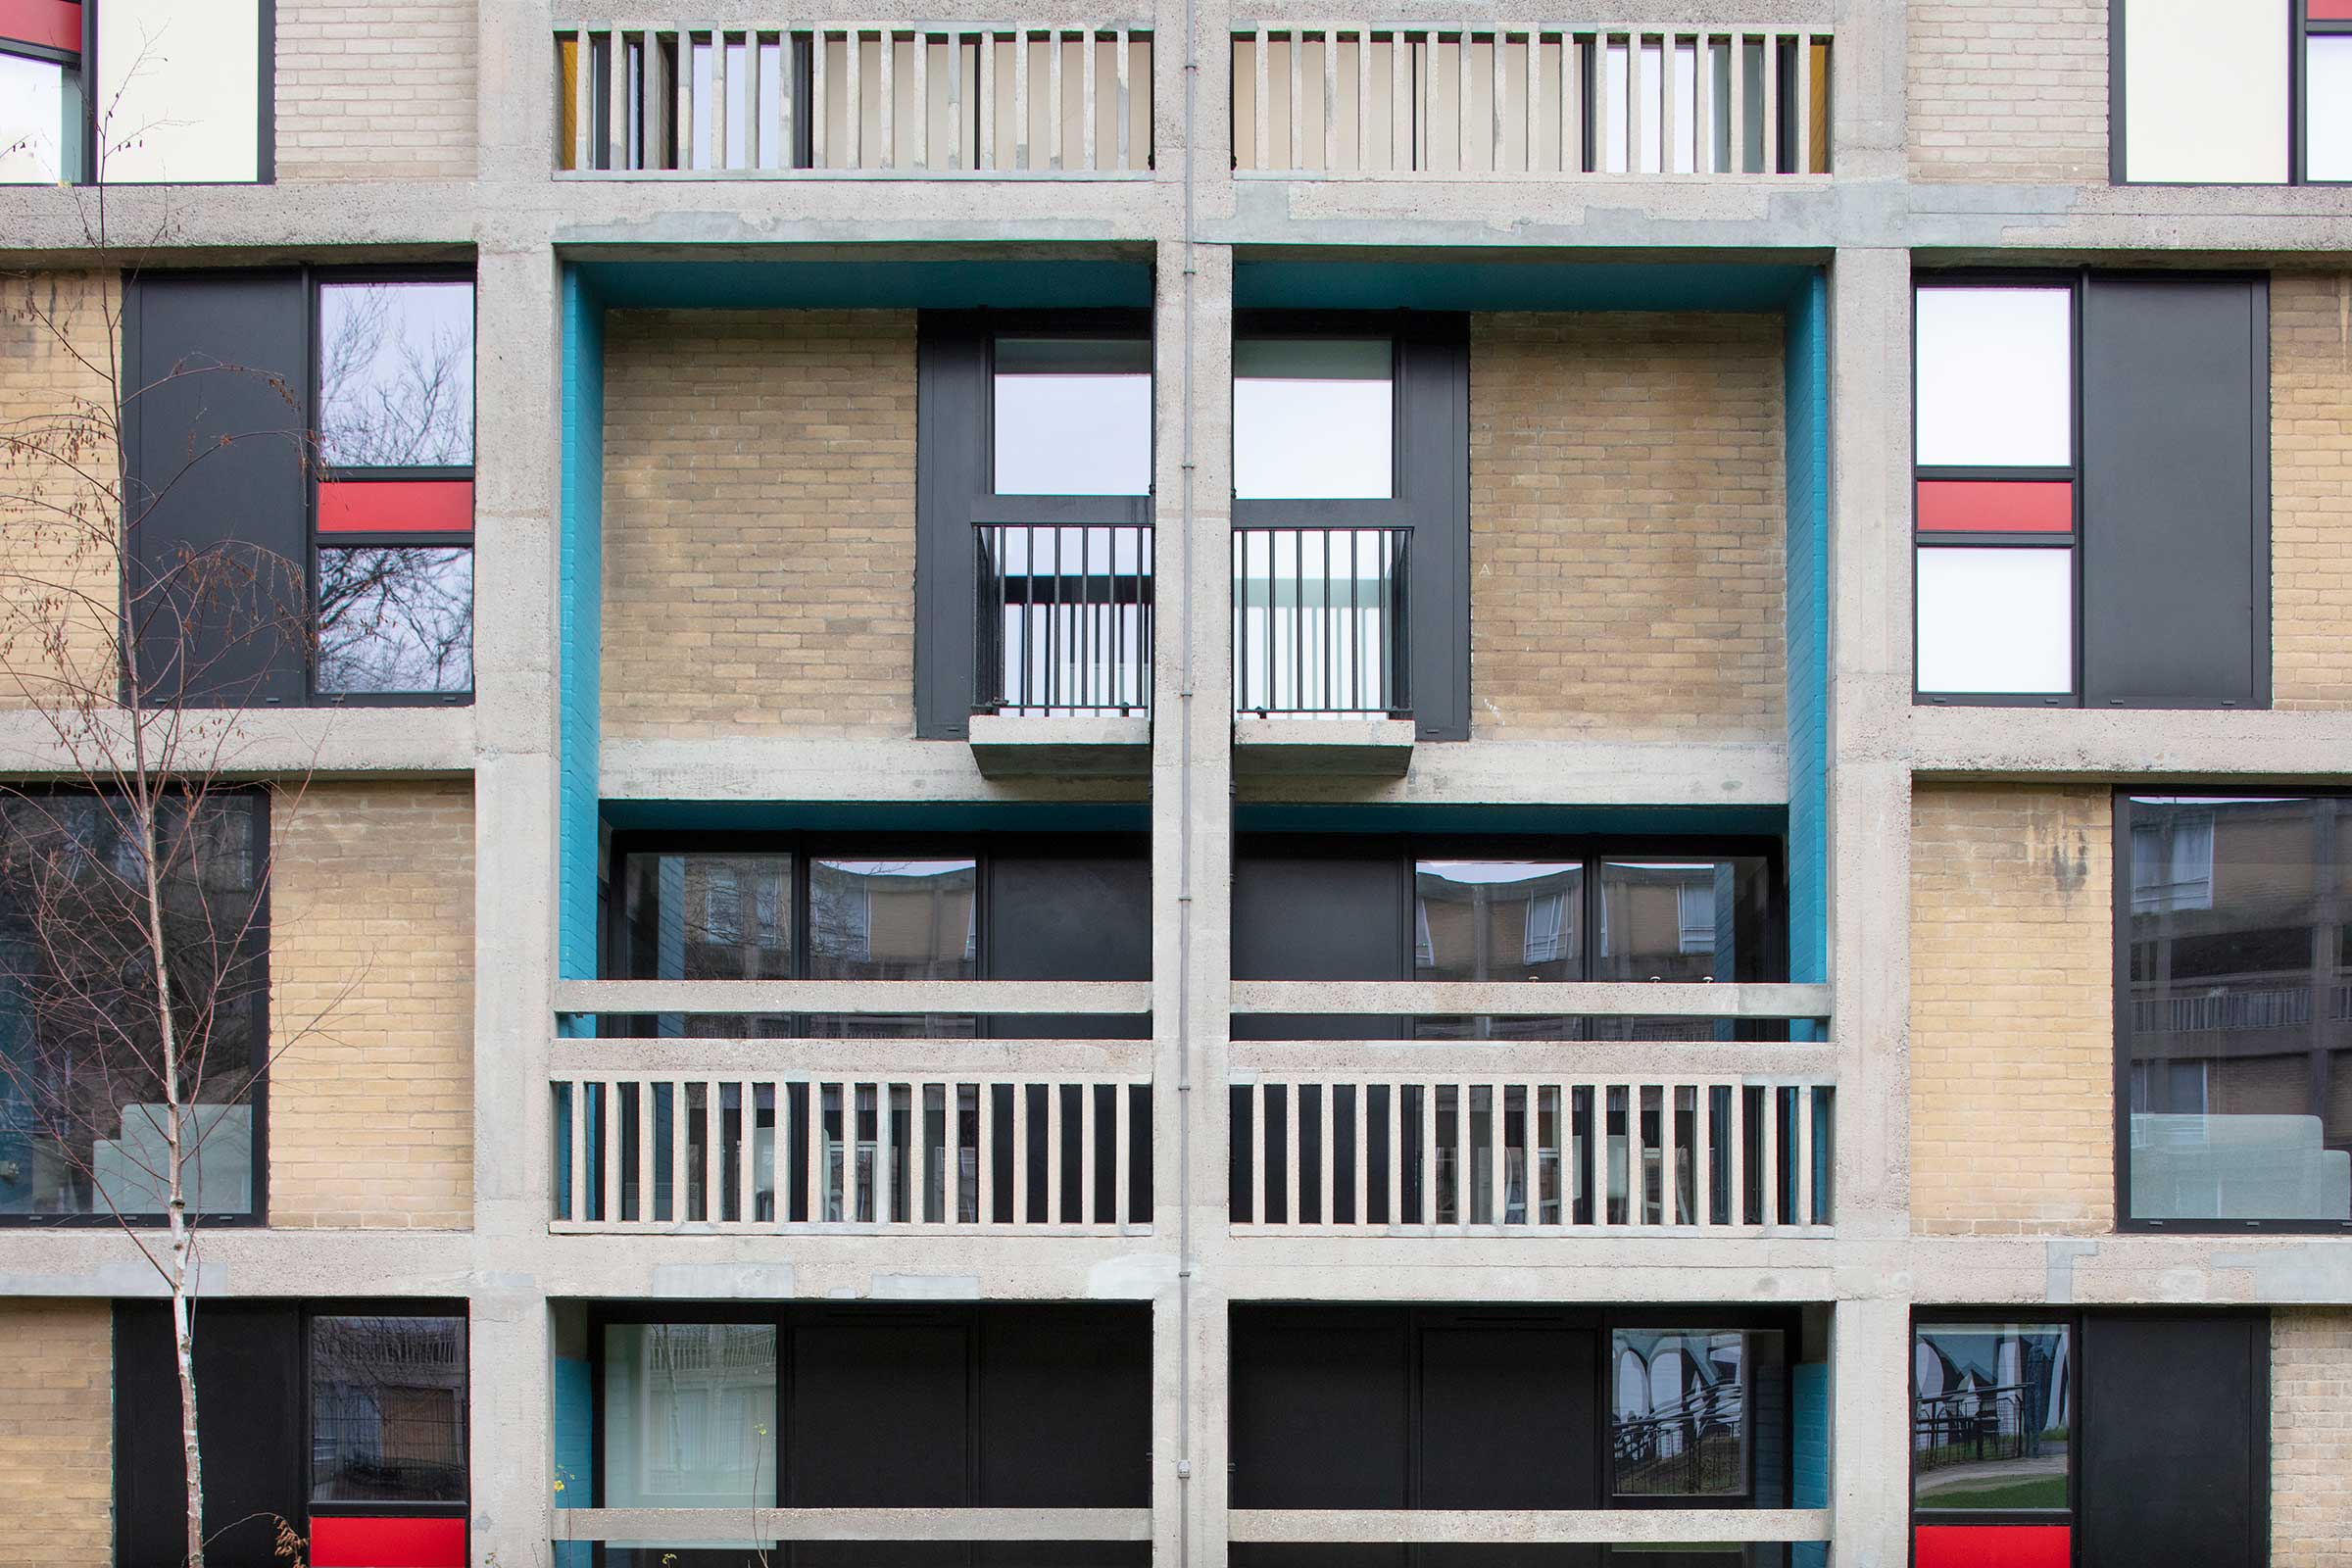 a front facing image of a brutalist, concrete building. There are aluminium windows and coloured panels interspersed between brick.